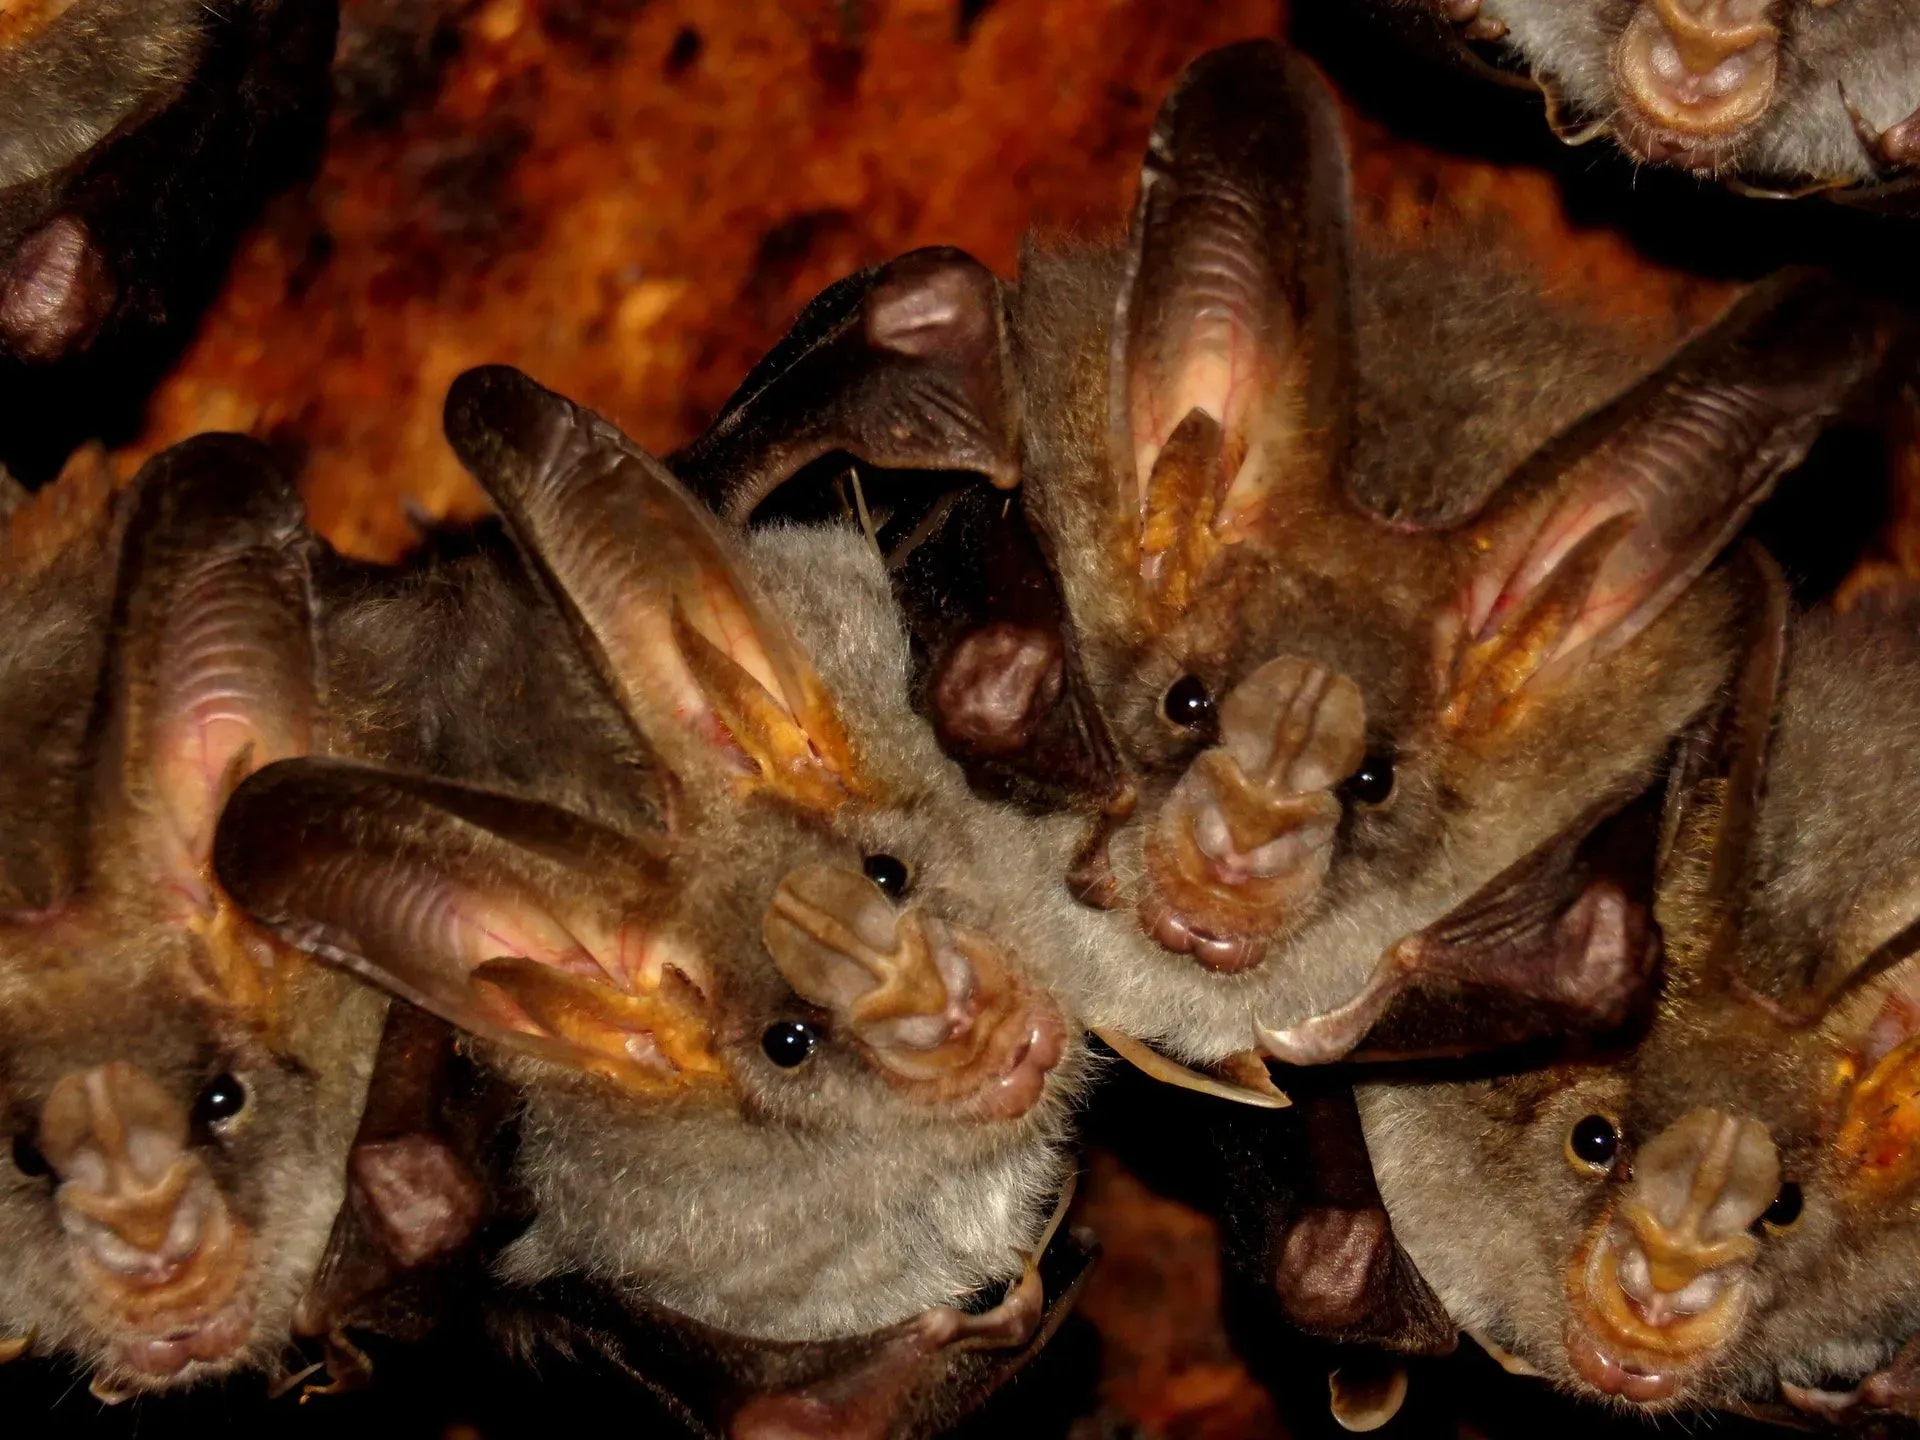 Know more about the behavior of a group of false vampire bats